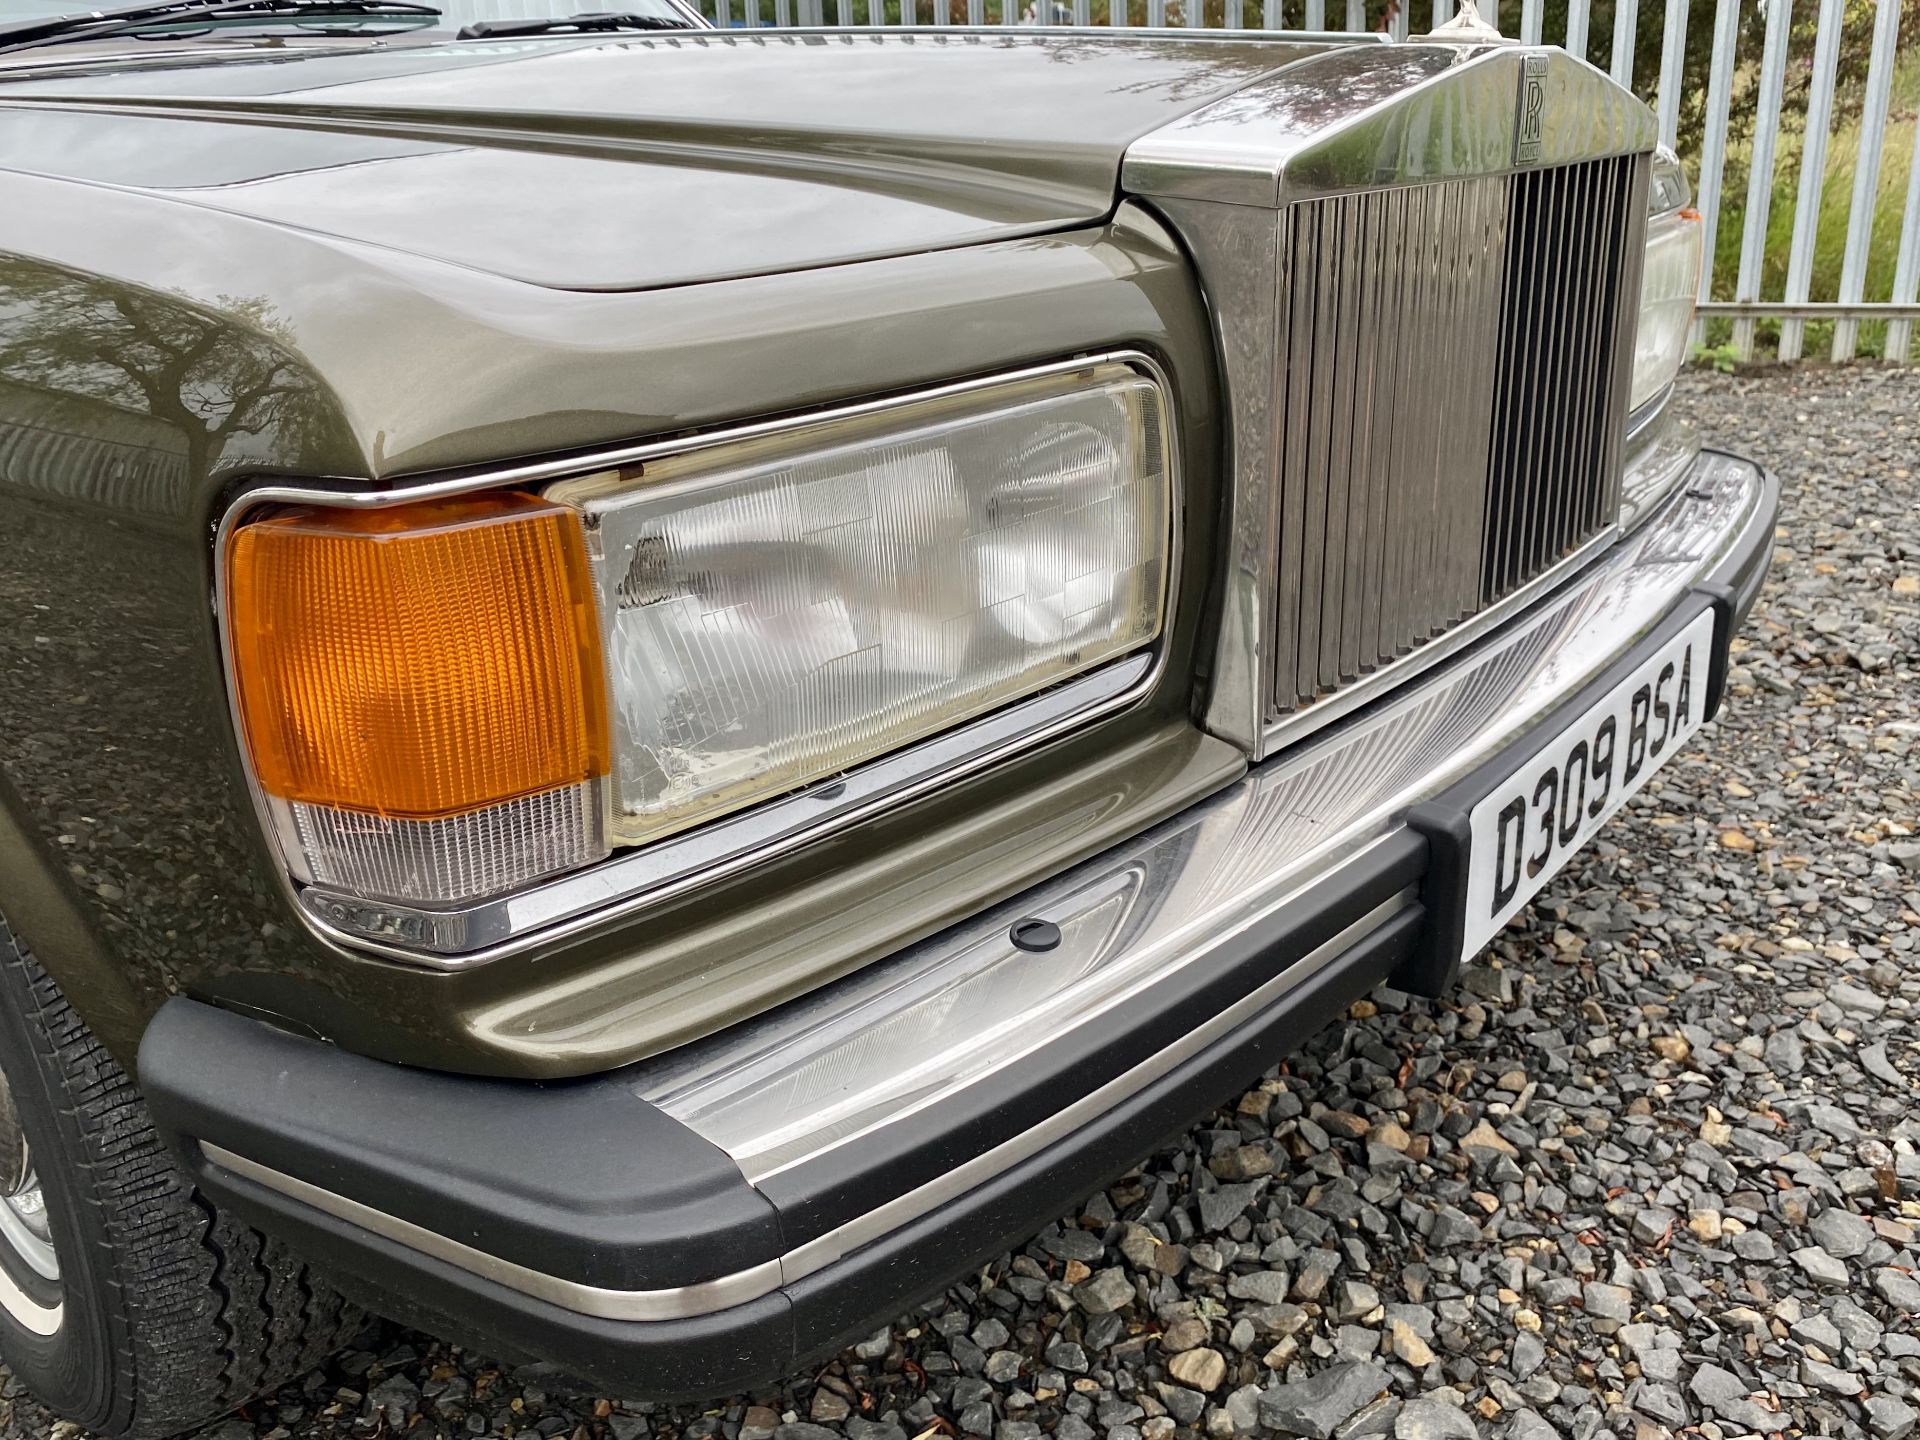 Rolls Royce Silver Spur - Image 18 of 55